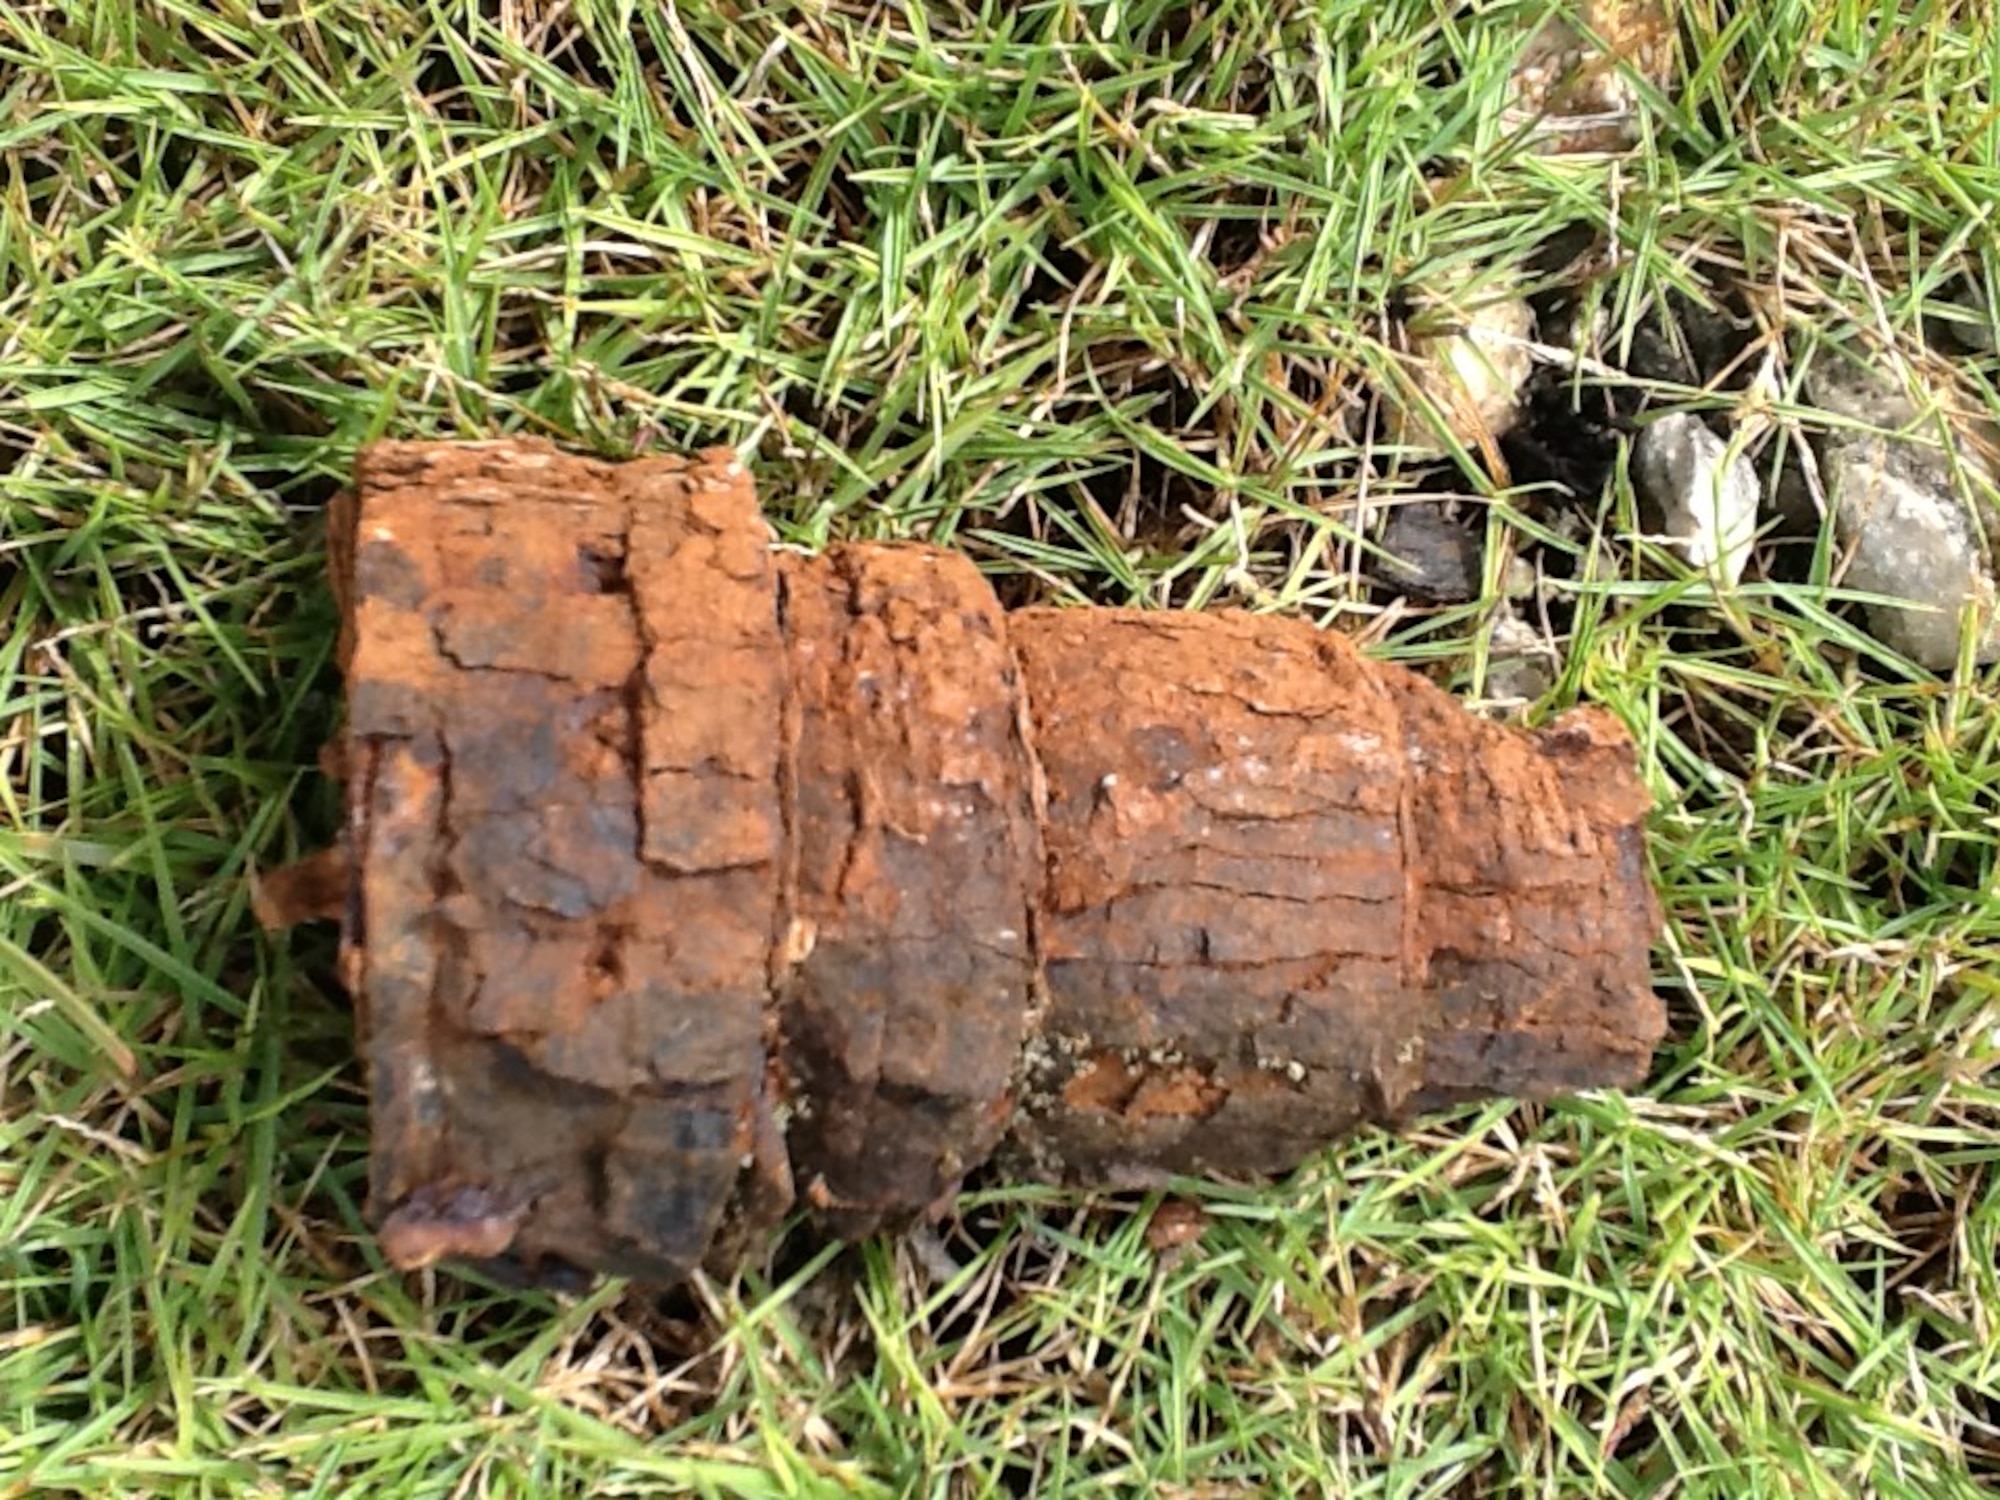 36th Civil Engineer Squadron Explosive Ordnance Disposal Airmen responded to this unexploded ordnance from World War II May 21, 2013, on Andersen Air Force Base, Guam. Members are advised to contact emergency officials immediately and set up a 50-foot cordon in the event a UXO is found. (Courtesy photo)